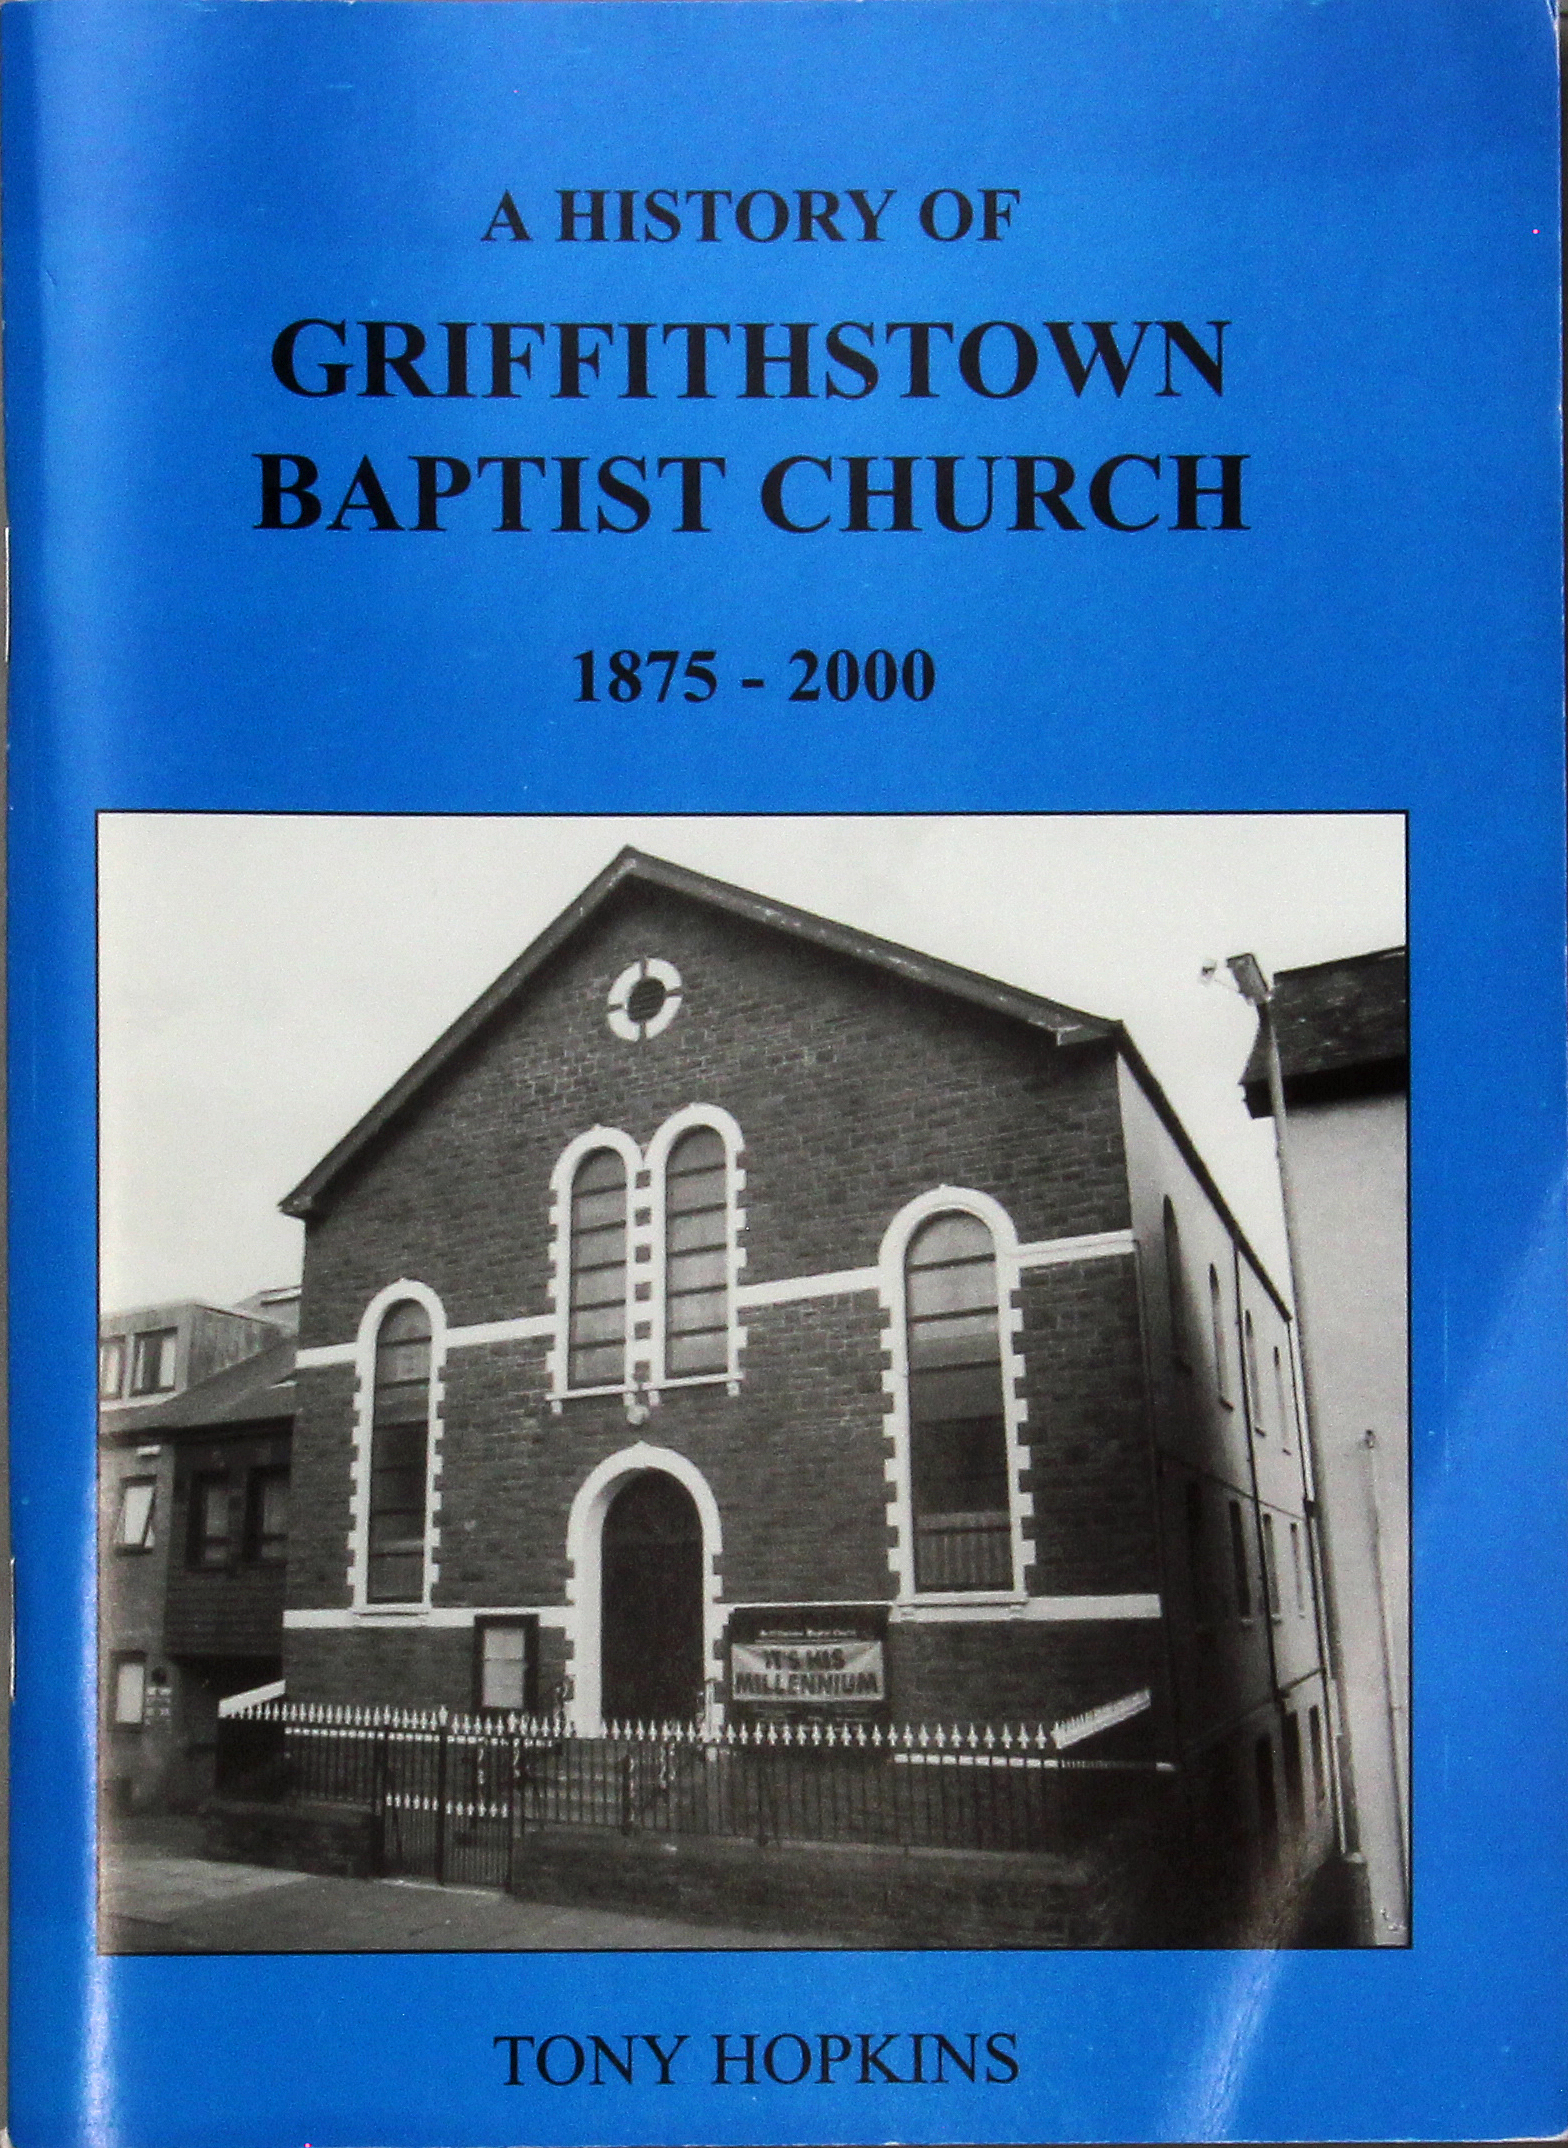 A History of Griffithstown Baptist Church 1875-2000